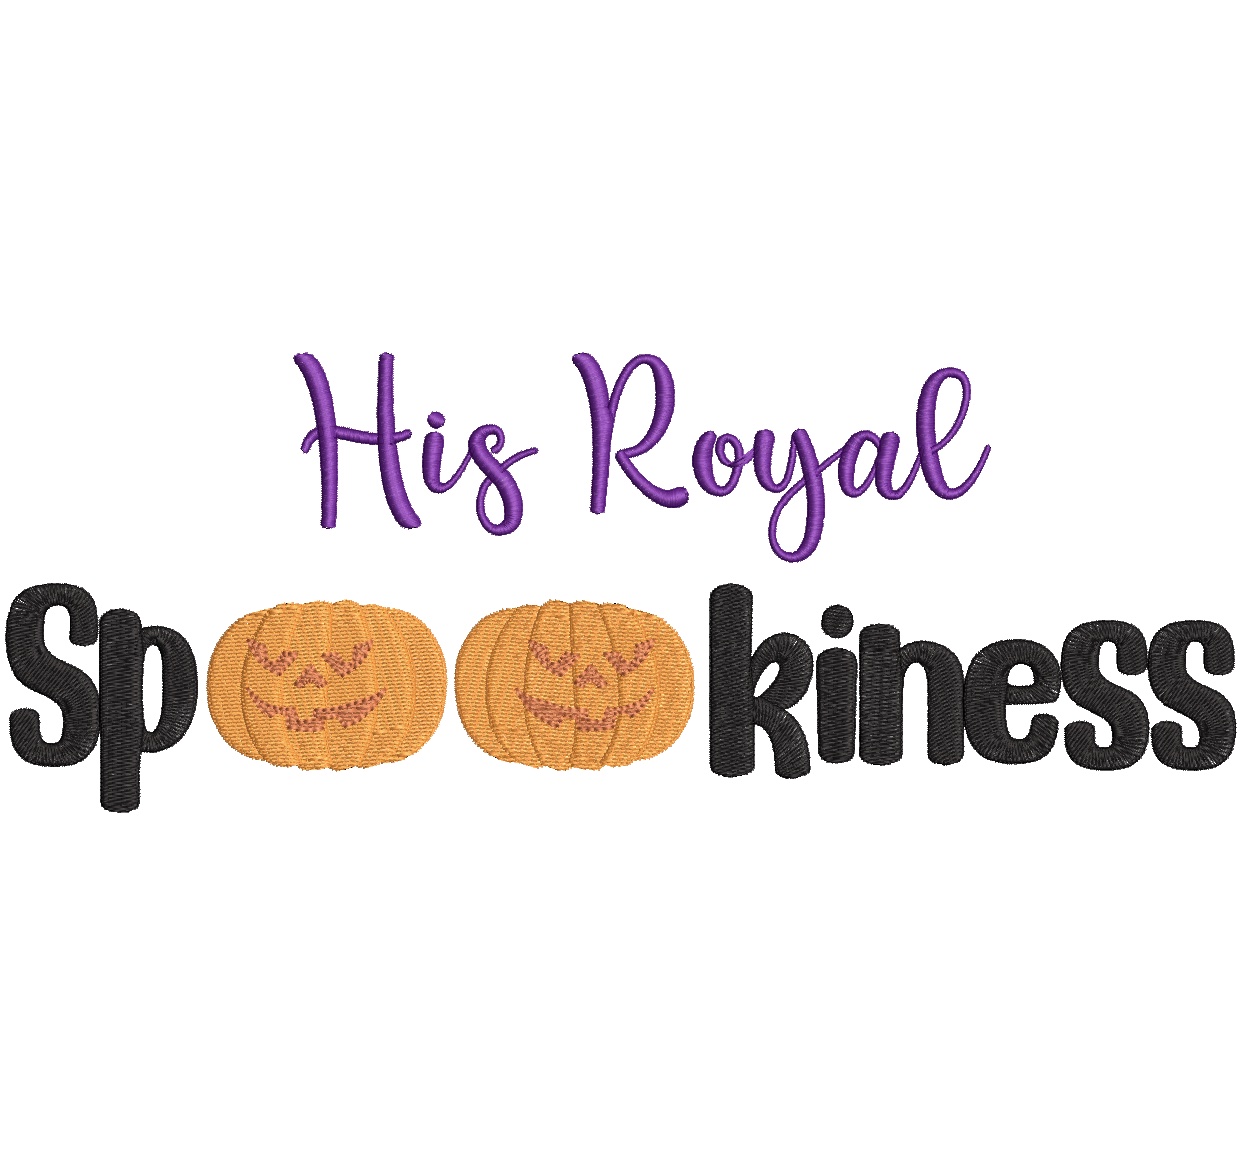 His Royal Spookiness